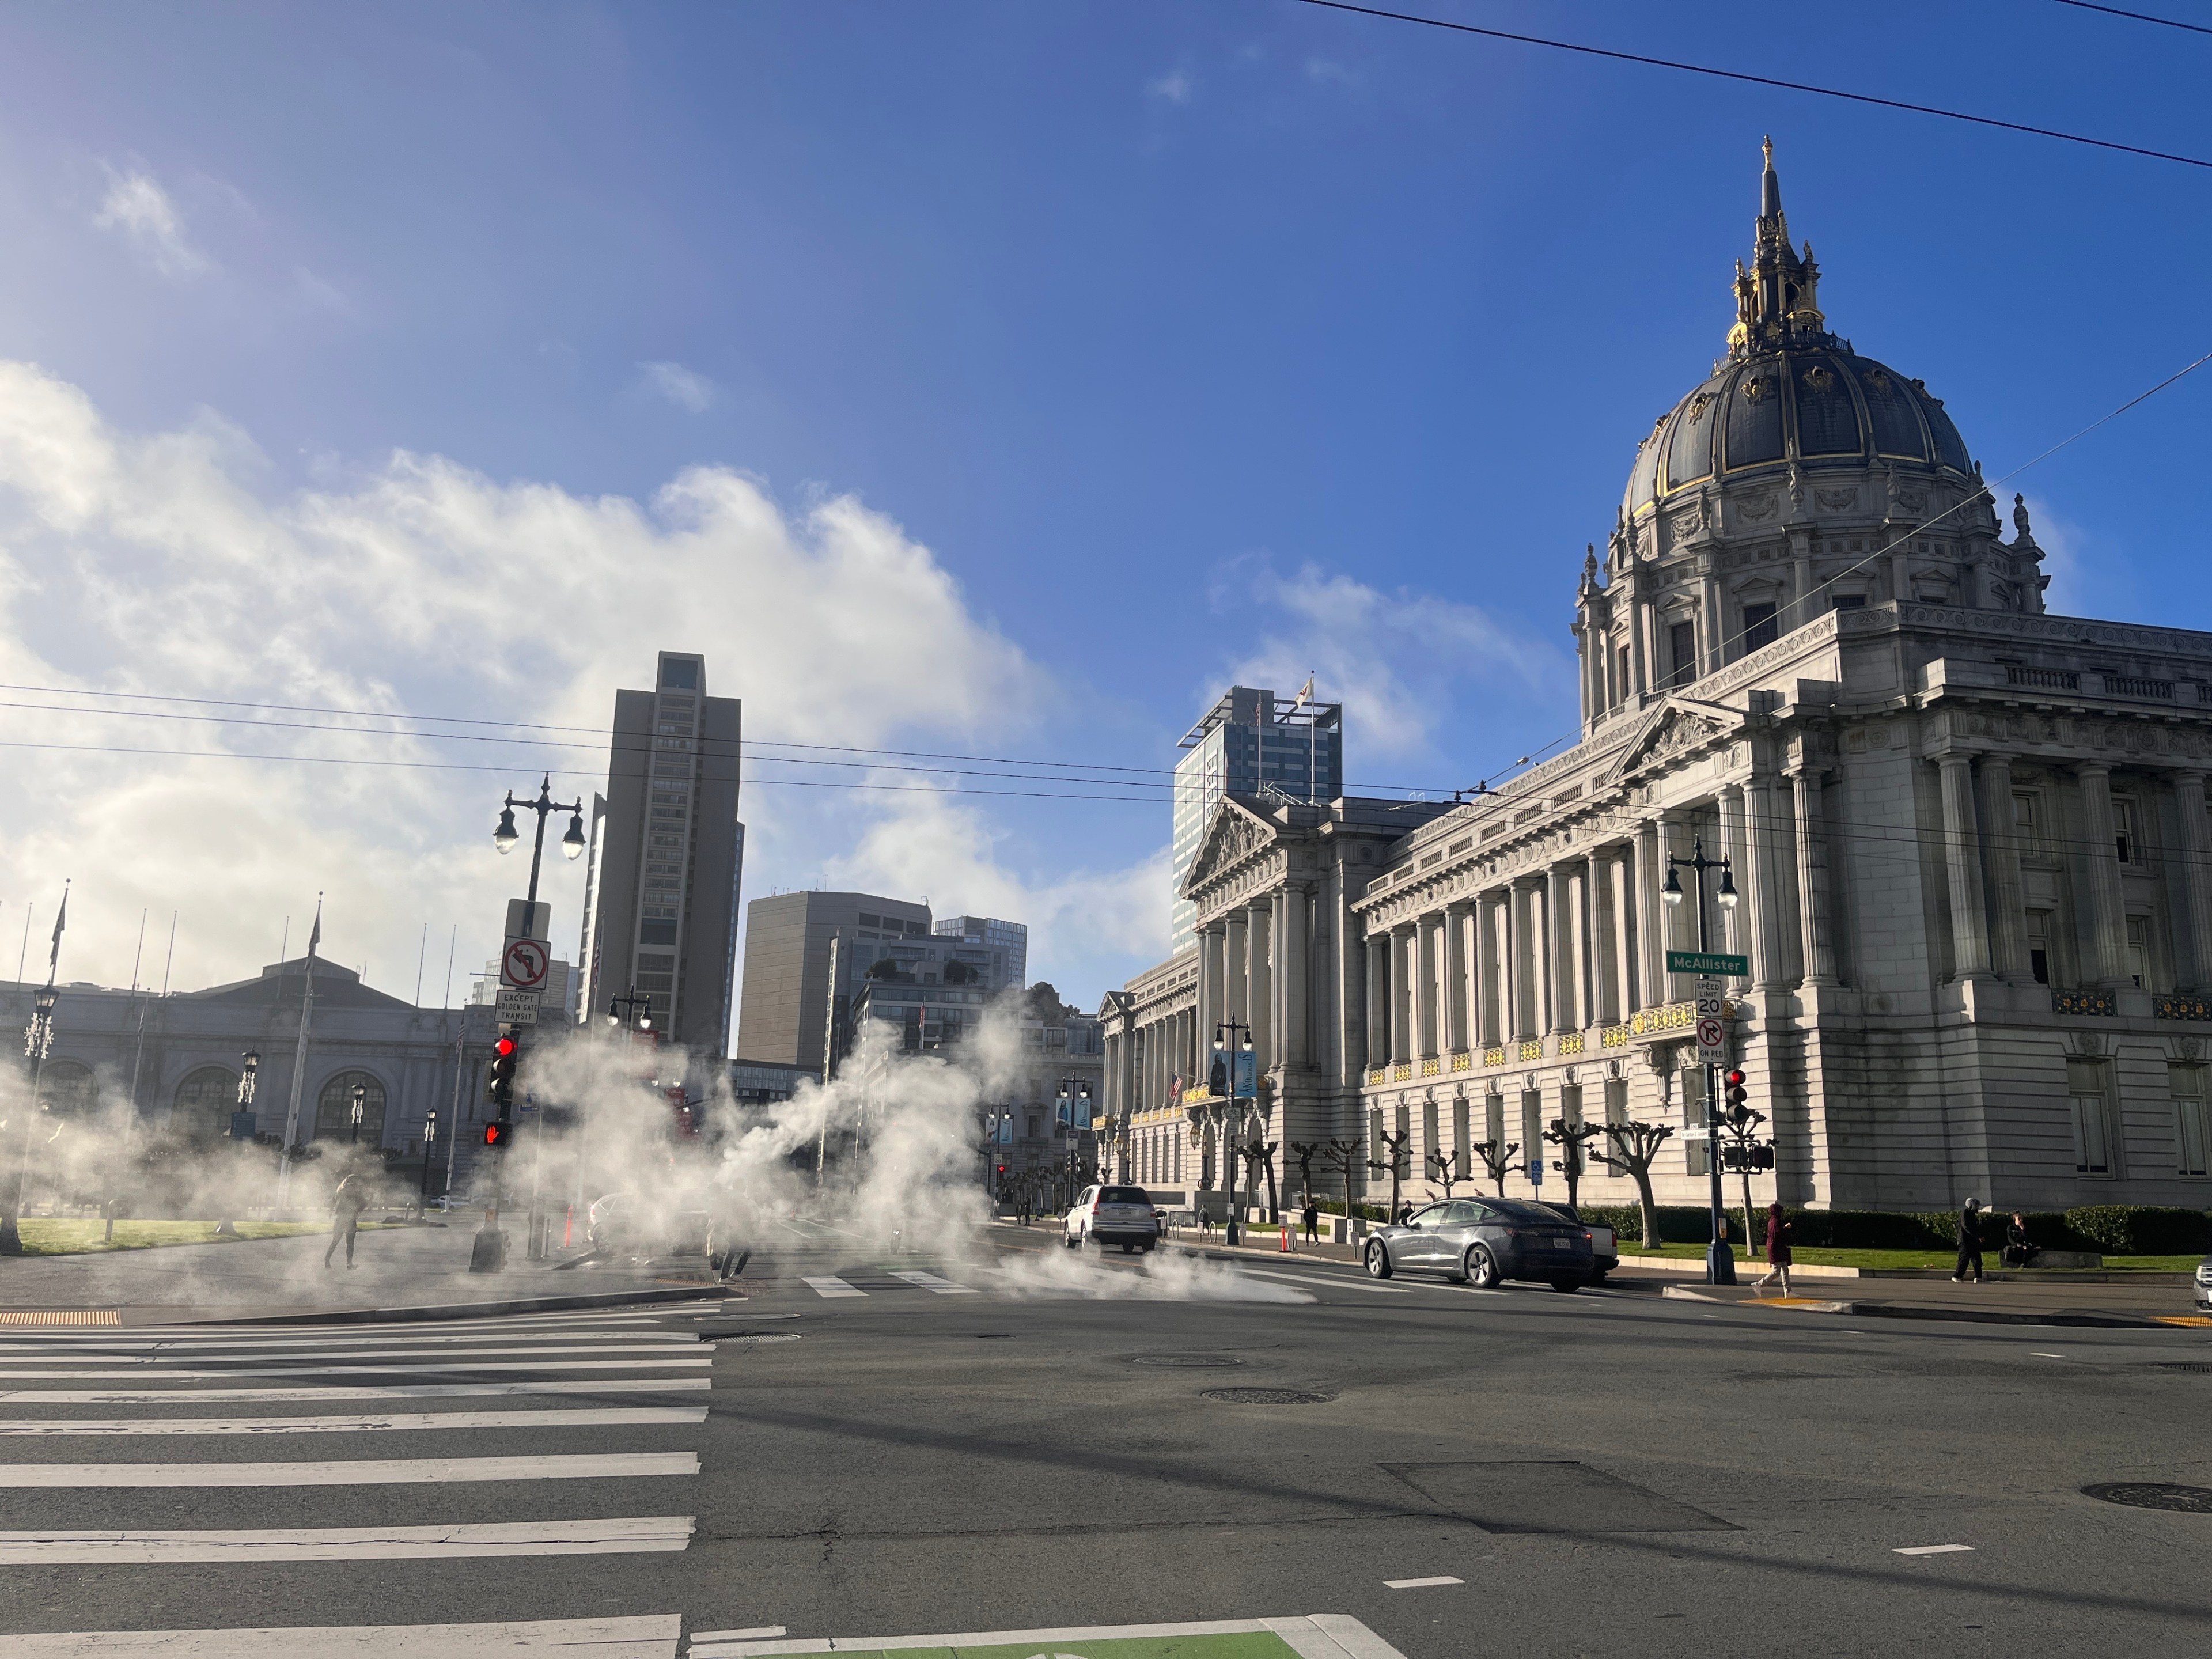 Steam rises from city street grates near a large domed building under a blue sky.